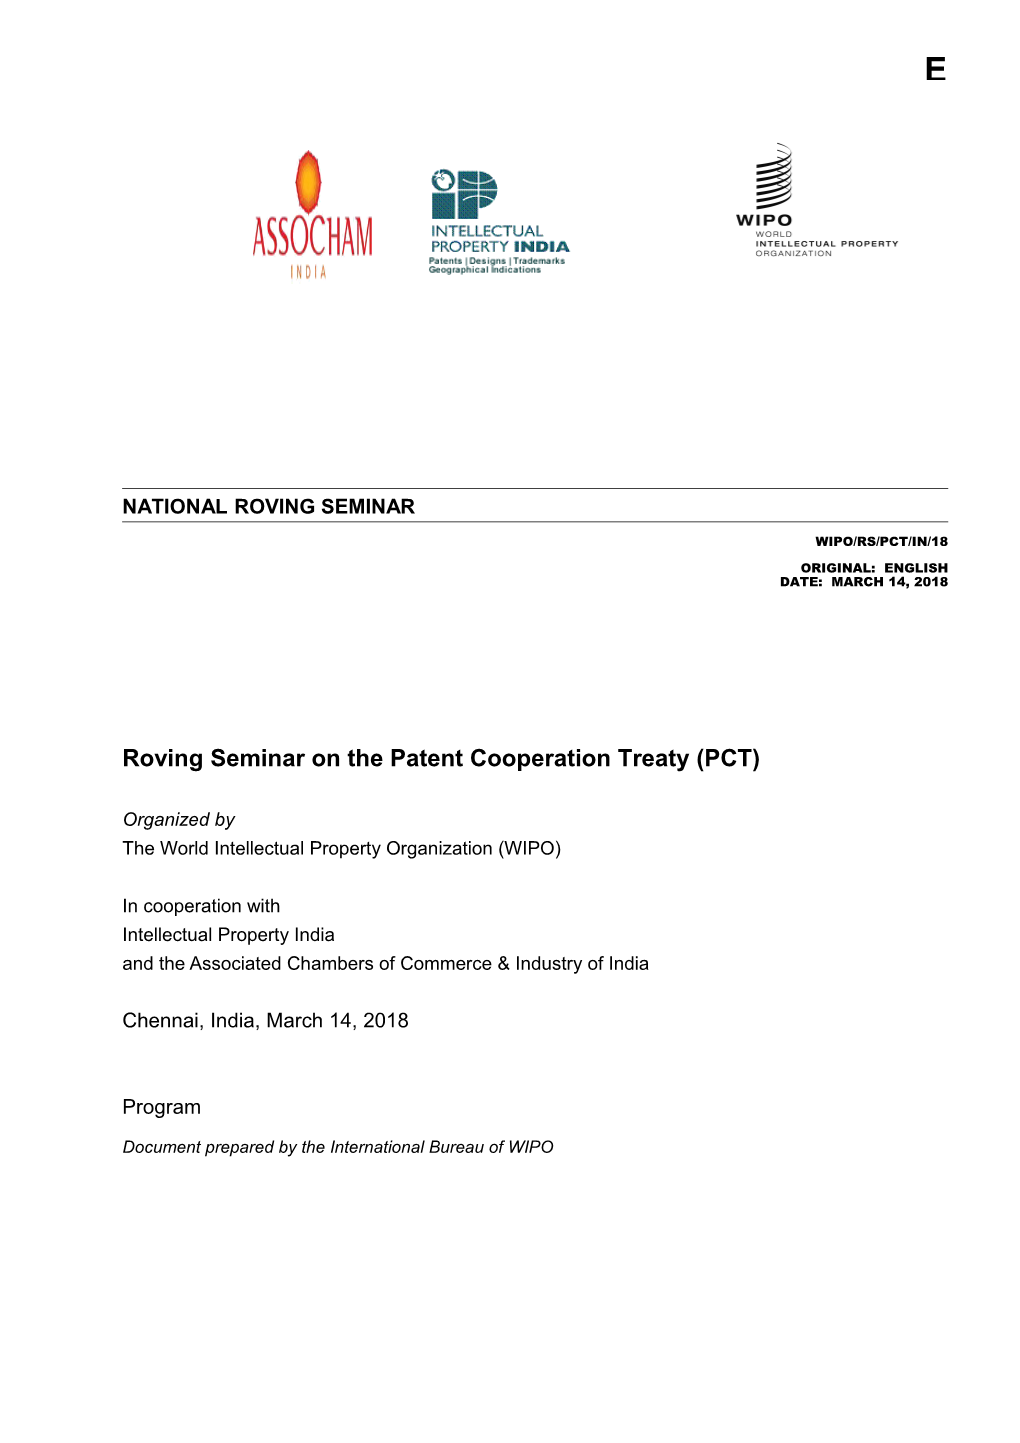 WIPO Roving Seminar on the Patent Cooperation Treaty (PCT)